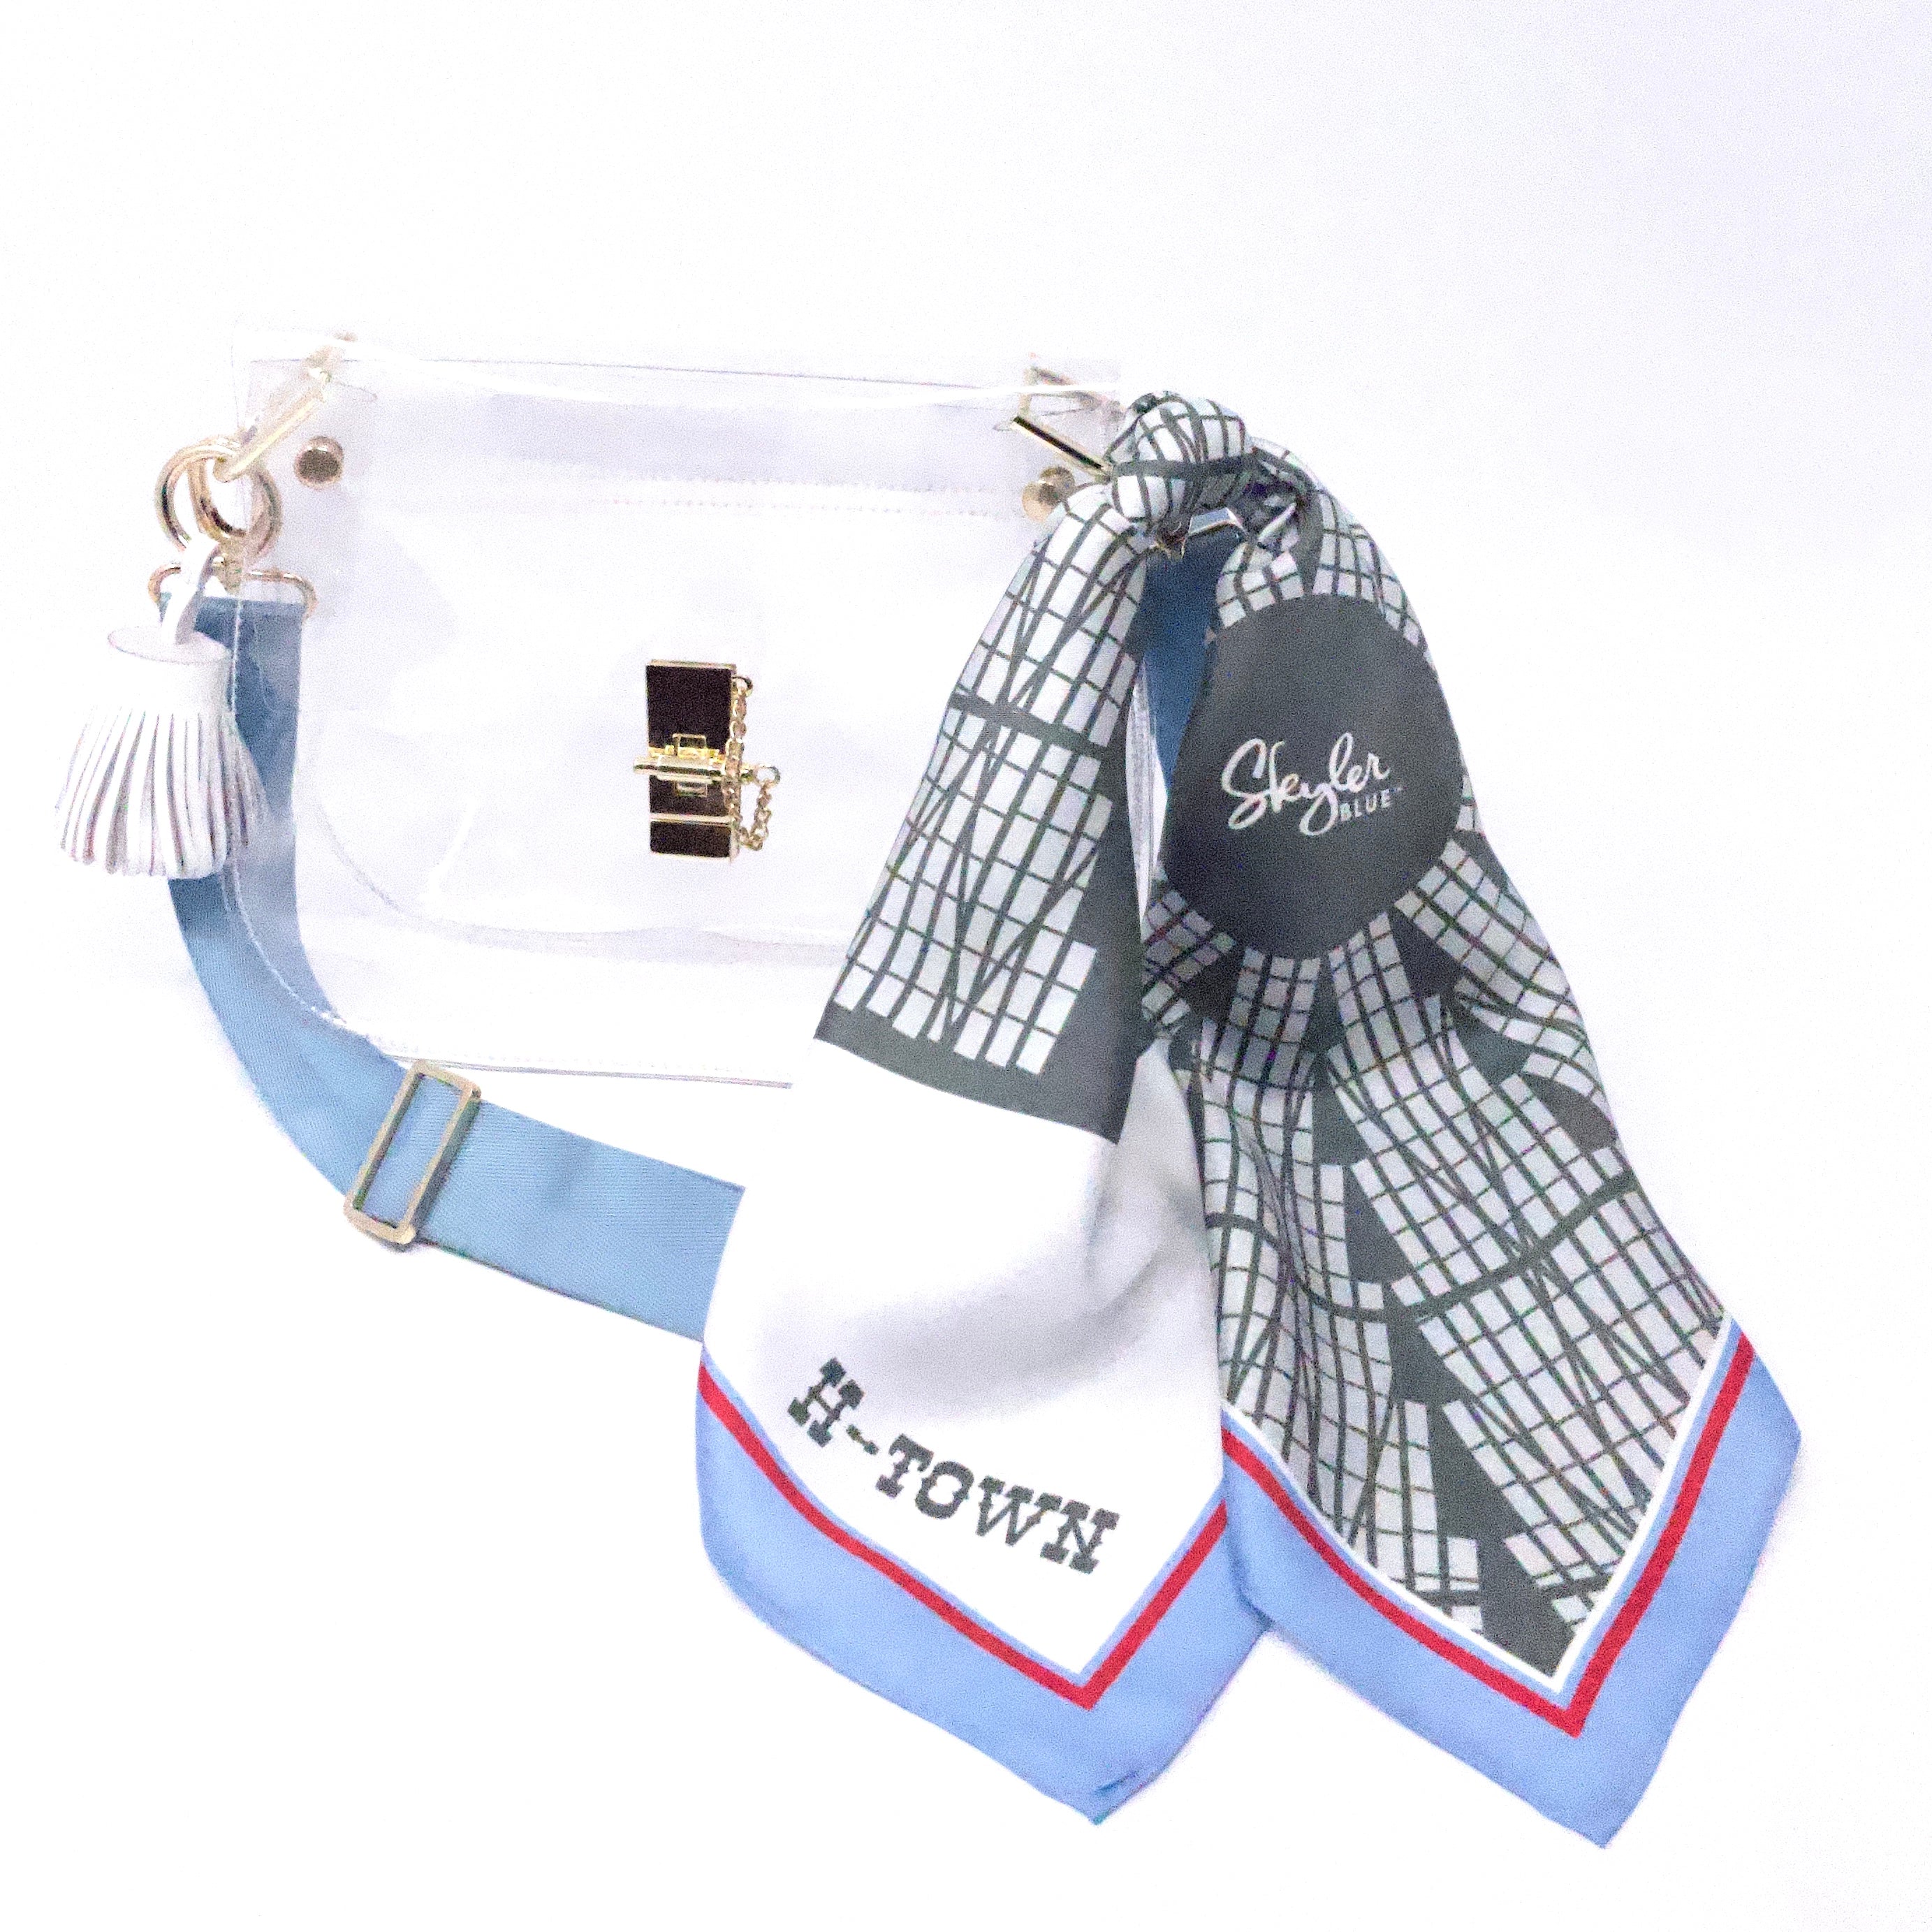 Skyler Blue’s The Dome - H-Town Medium Saddle Clear Bag stadium approved clear bag / clear purse including adjustable, nylon webbing shoulder or crossbody strap with herringbone weave and gold hardware, 60-centimeter 100% silk twill scarf, and 100% genuine leather tassel. 